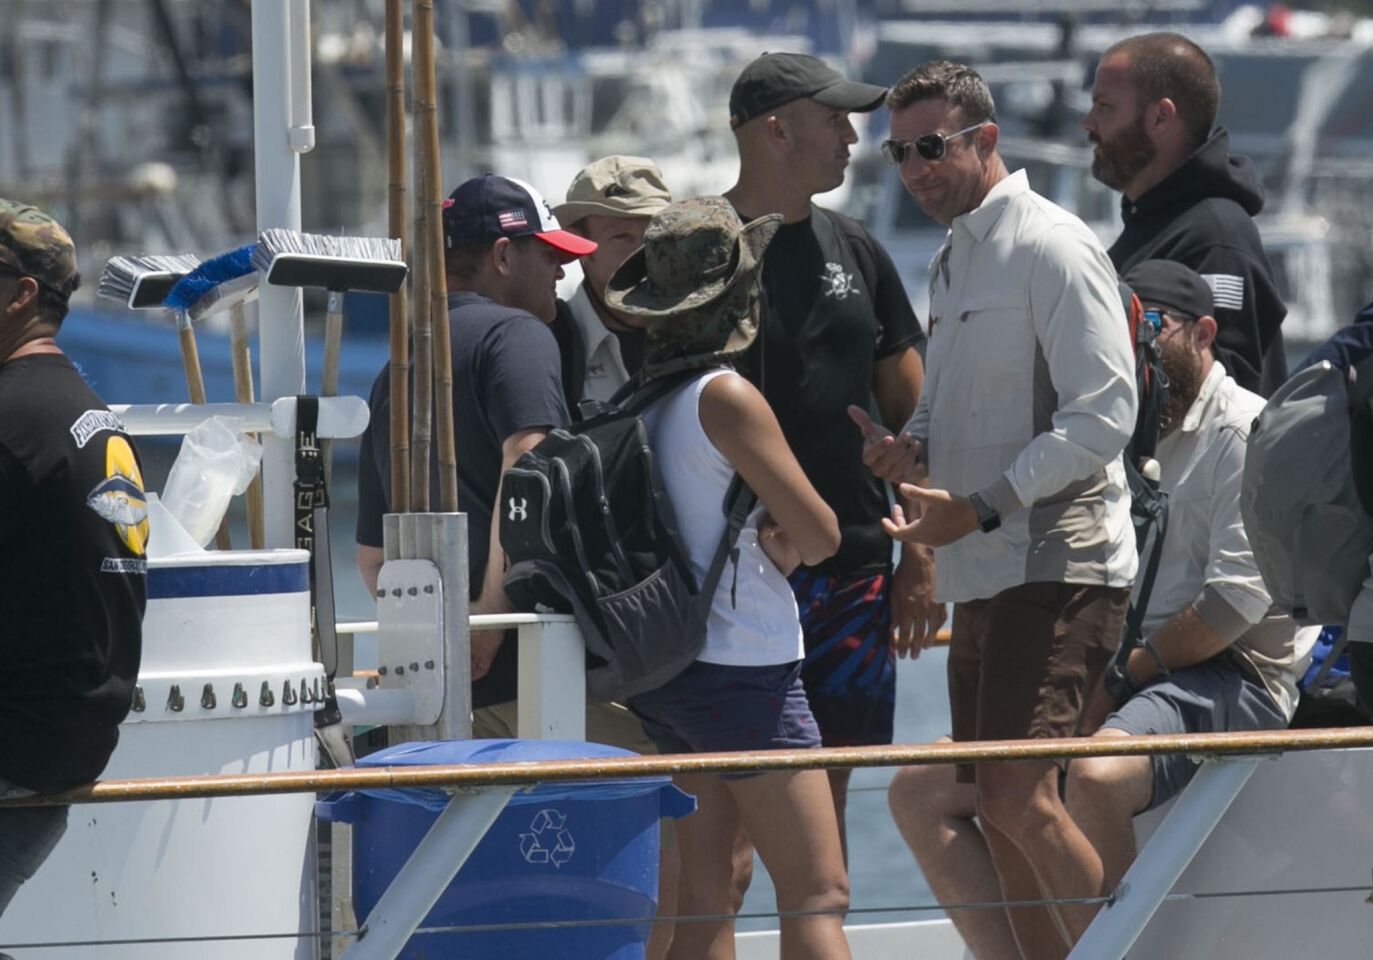 Congressman Duncan D. Hunter, spoke to other passengers before leaving the fishing boat "Dolphin" as it docked in San Diego after returning from a Rivers of Recovery Fishing Tournament for Wounded Combat Veterans fundraiser.